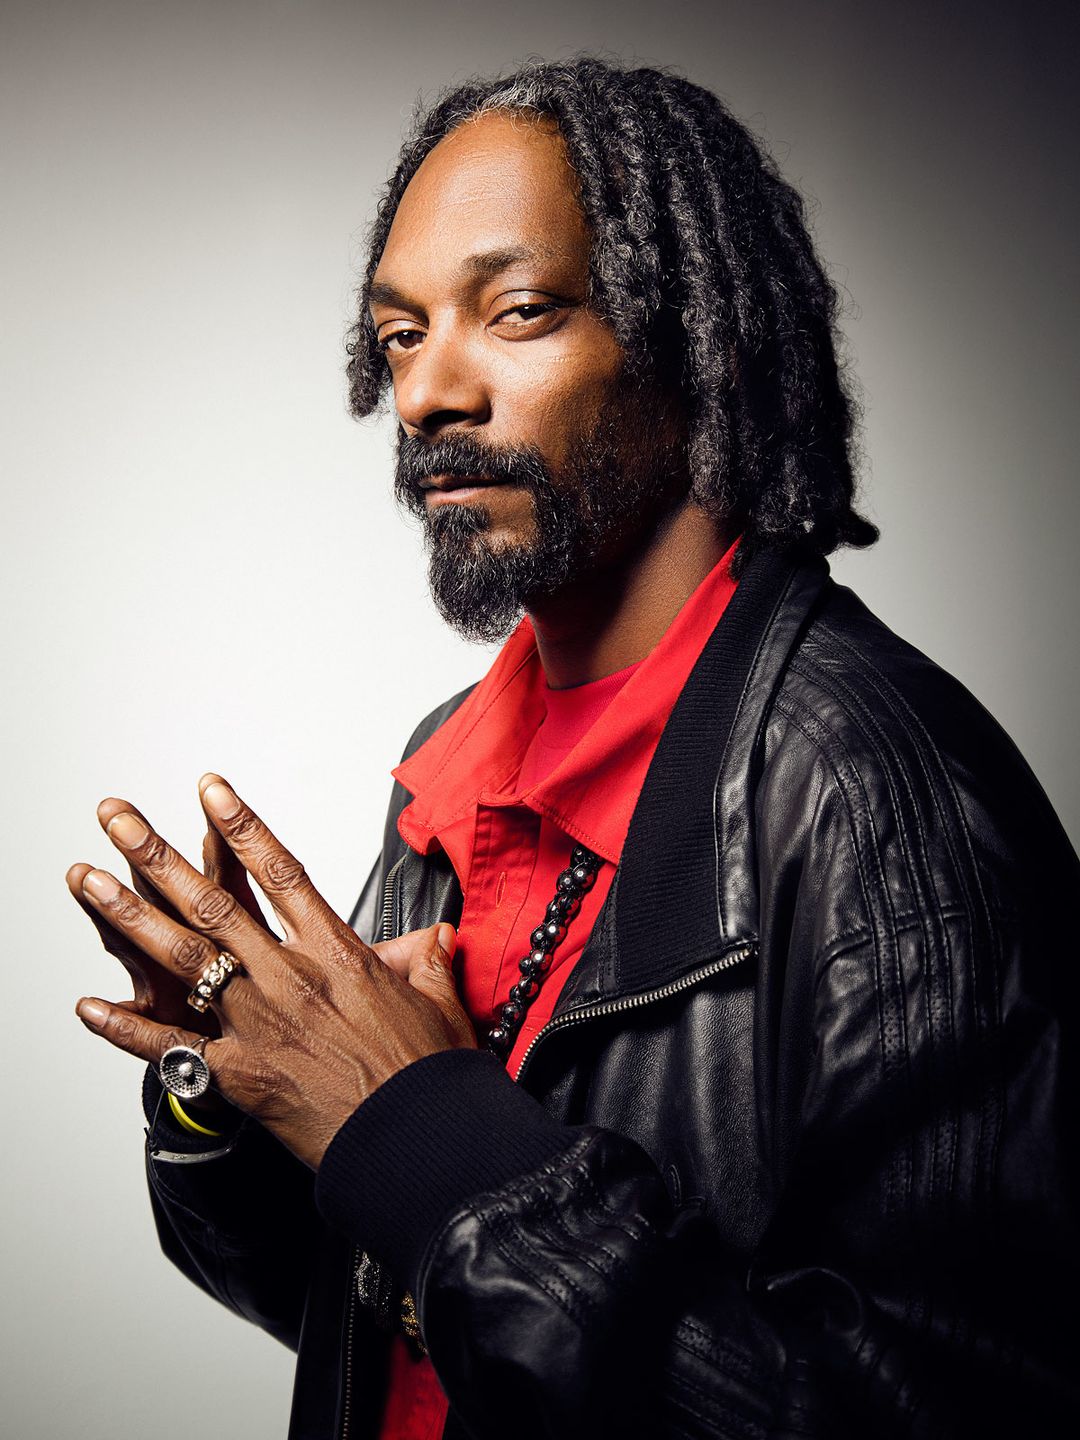 Snoop Dogg how old is he